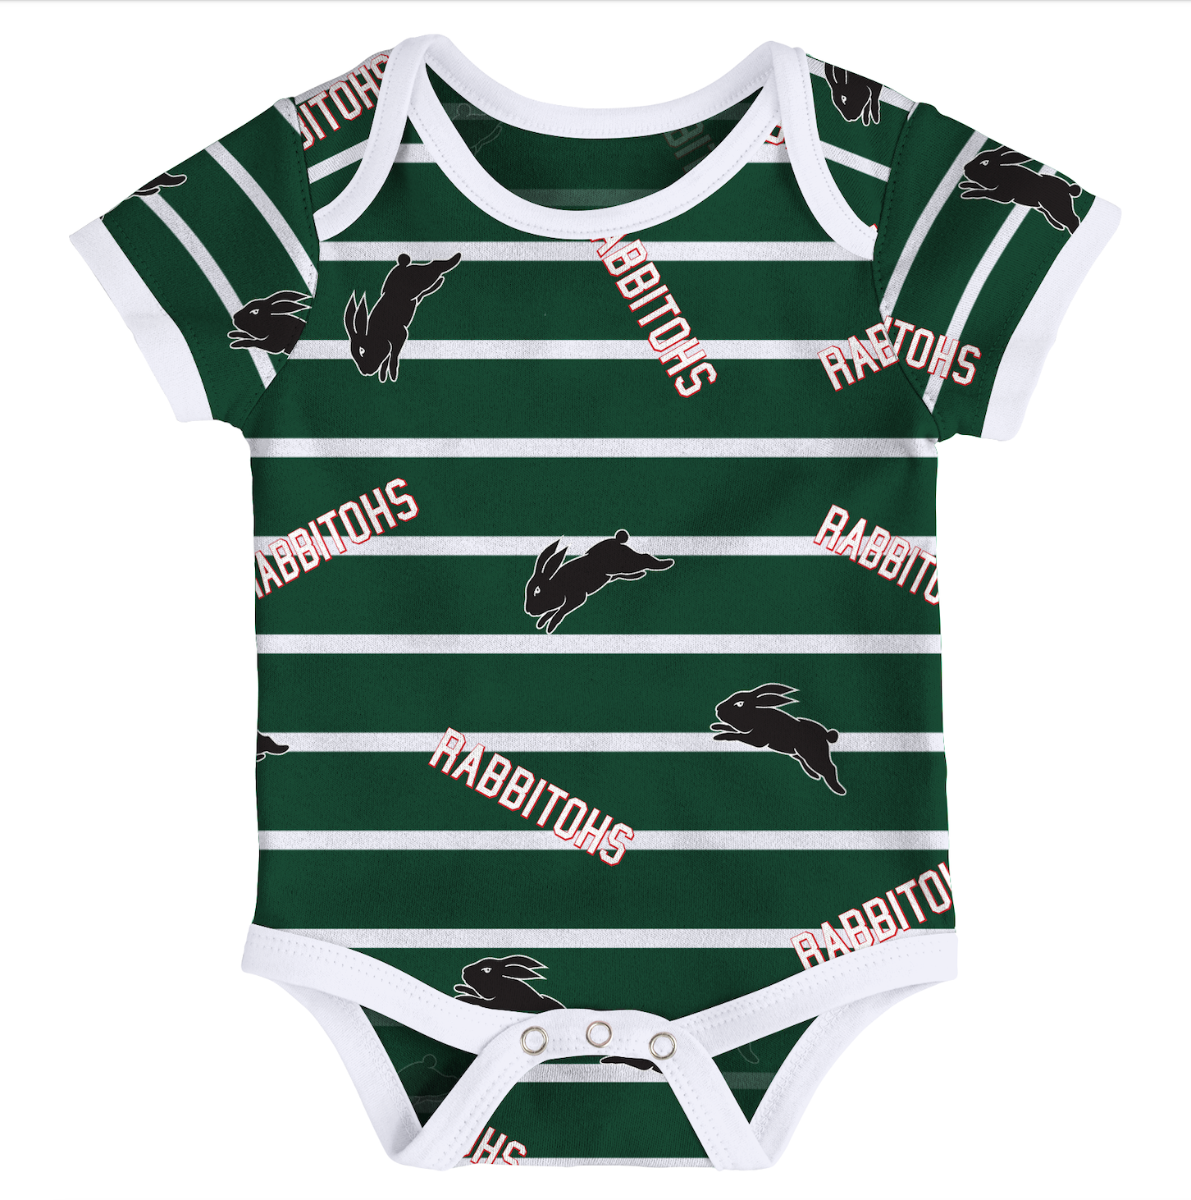 NRL Footy Suit Body Suit Baby Toddler Infant South Sydney Rabbitohs 